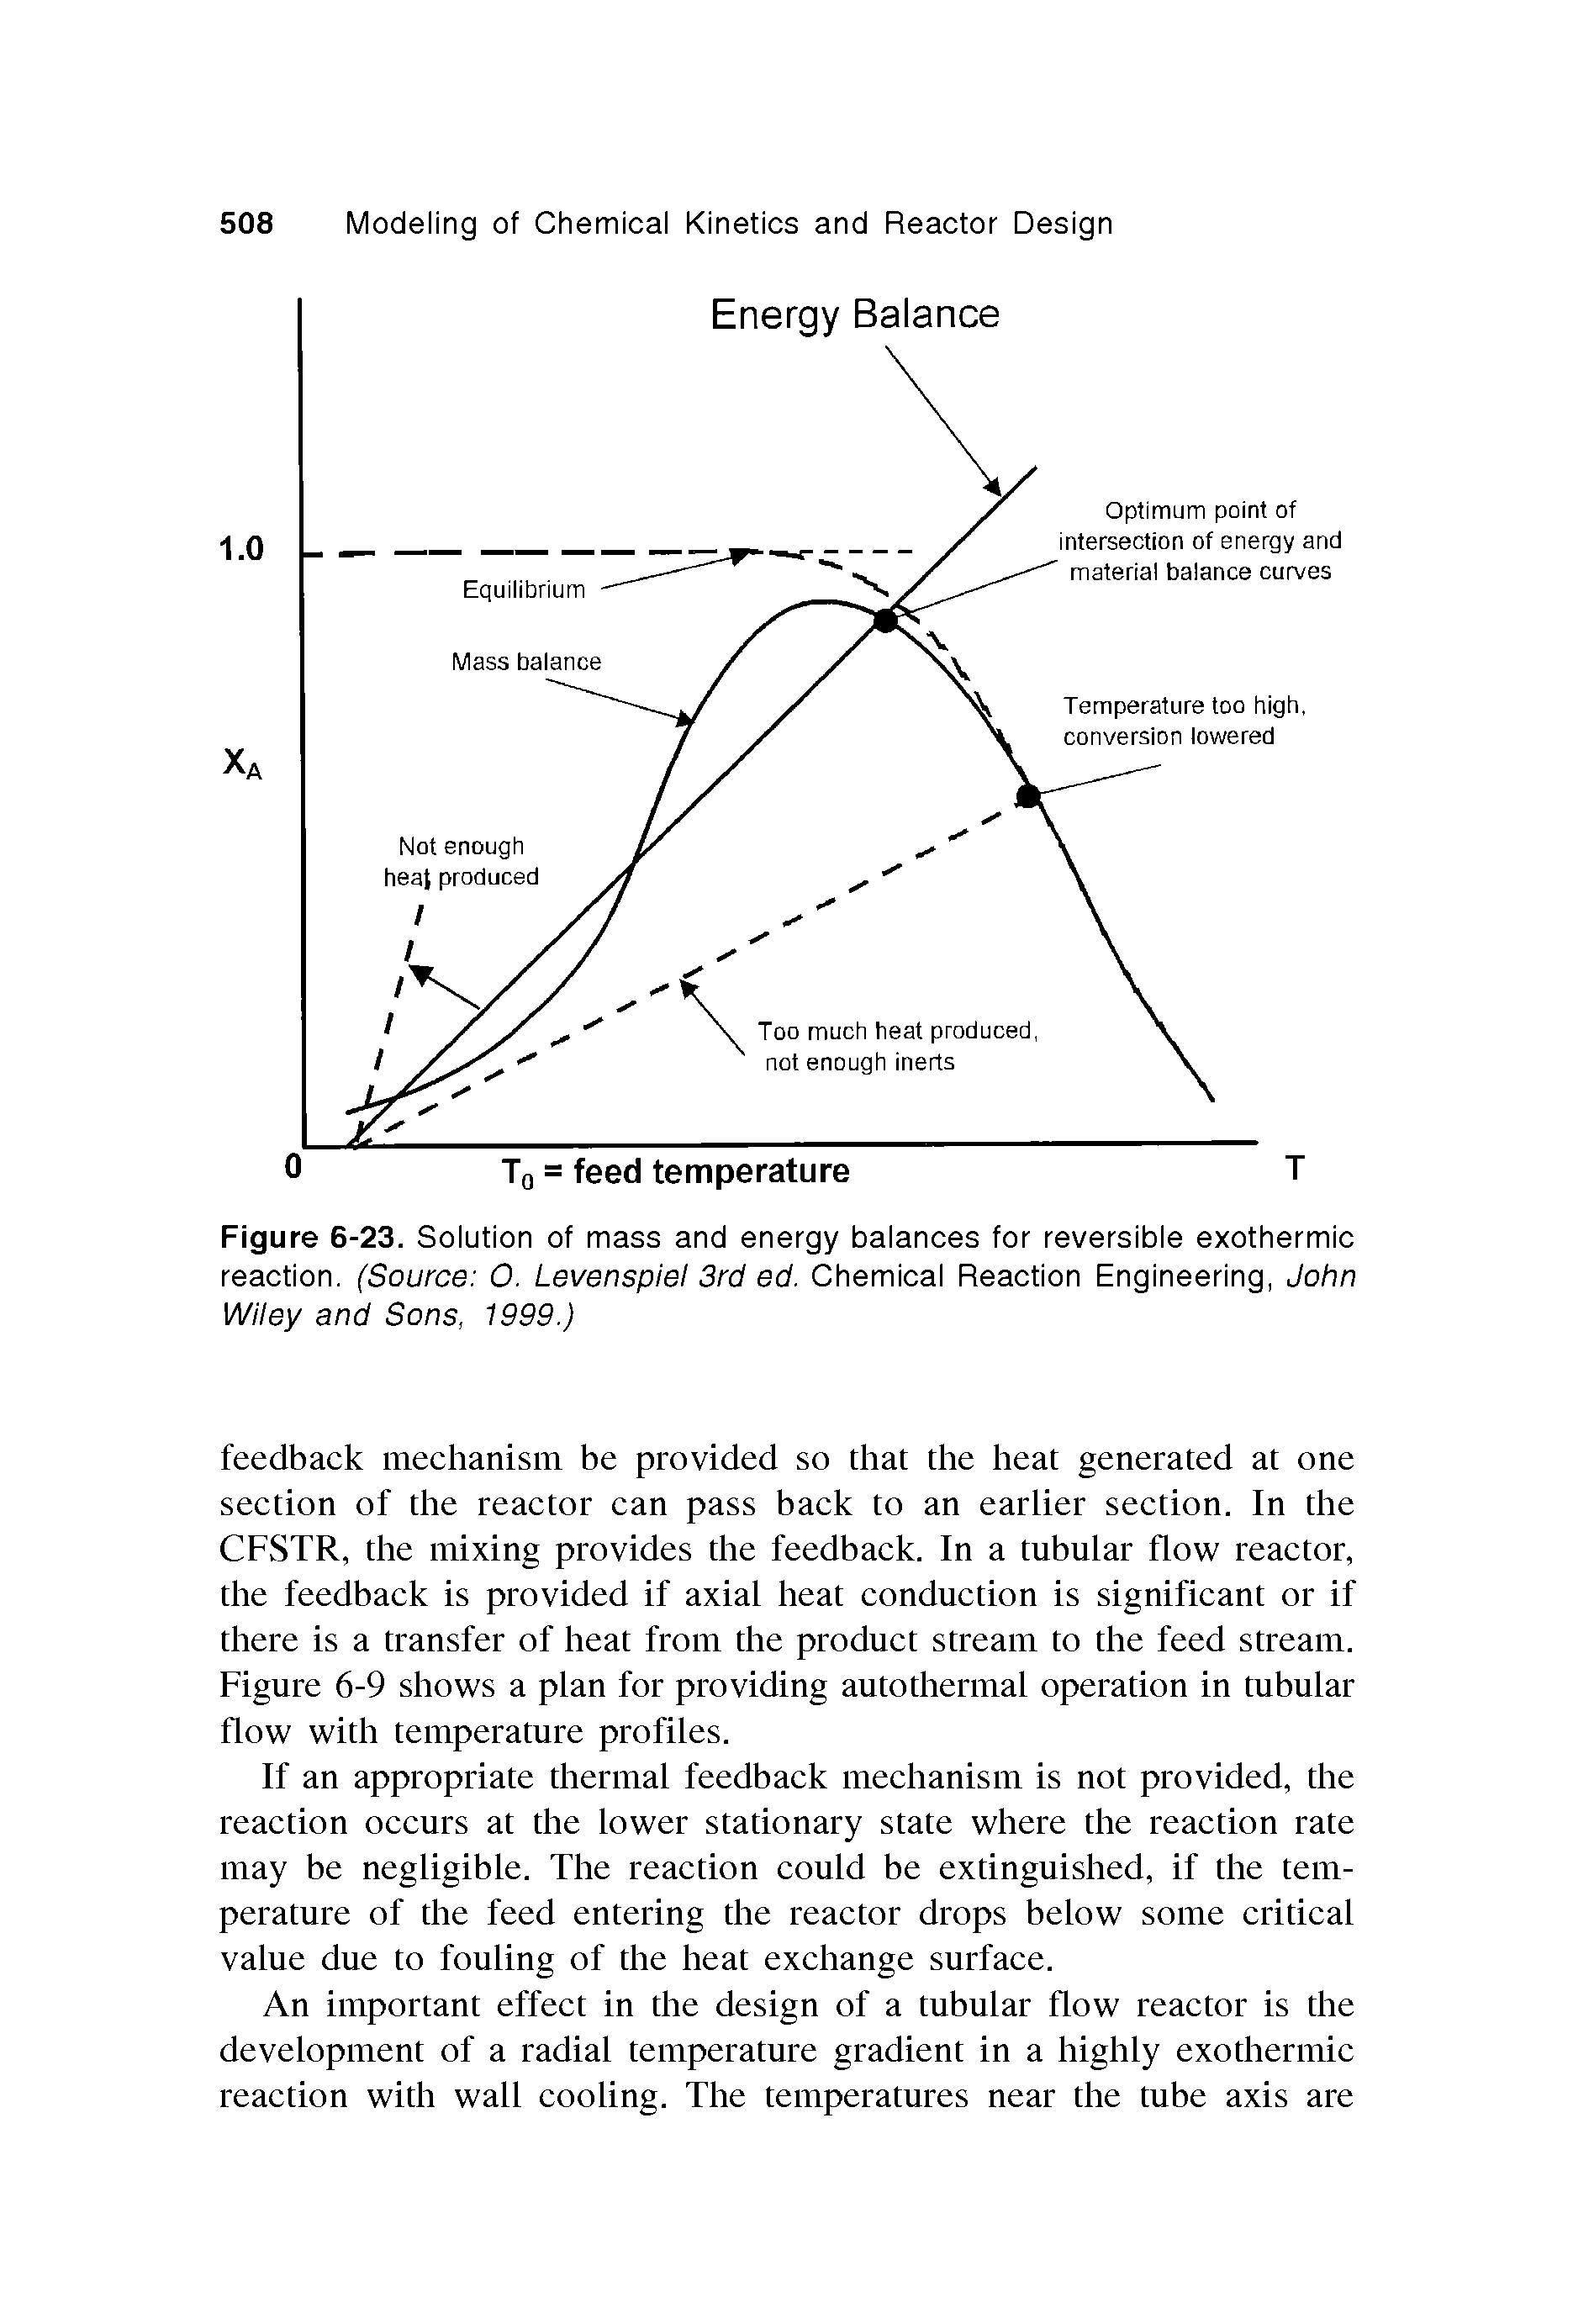 Figure 6-23. Solution of mass and energy balanoes for reversible exothermio reaotion. (Source 0. Levenspiel 3rd ed. Chemioal Reaotion Engineering, John Wiley and Sons, 1999.)...